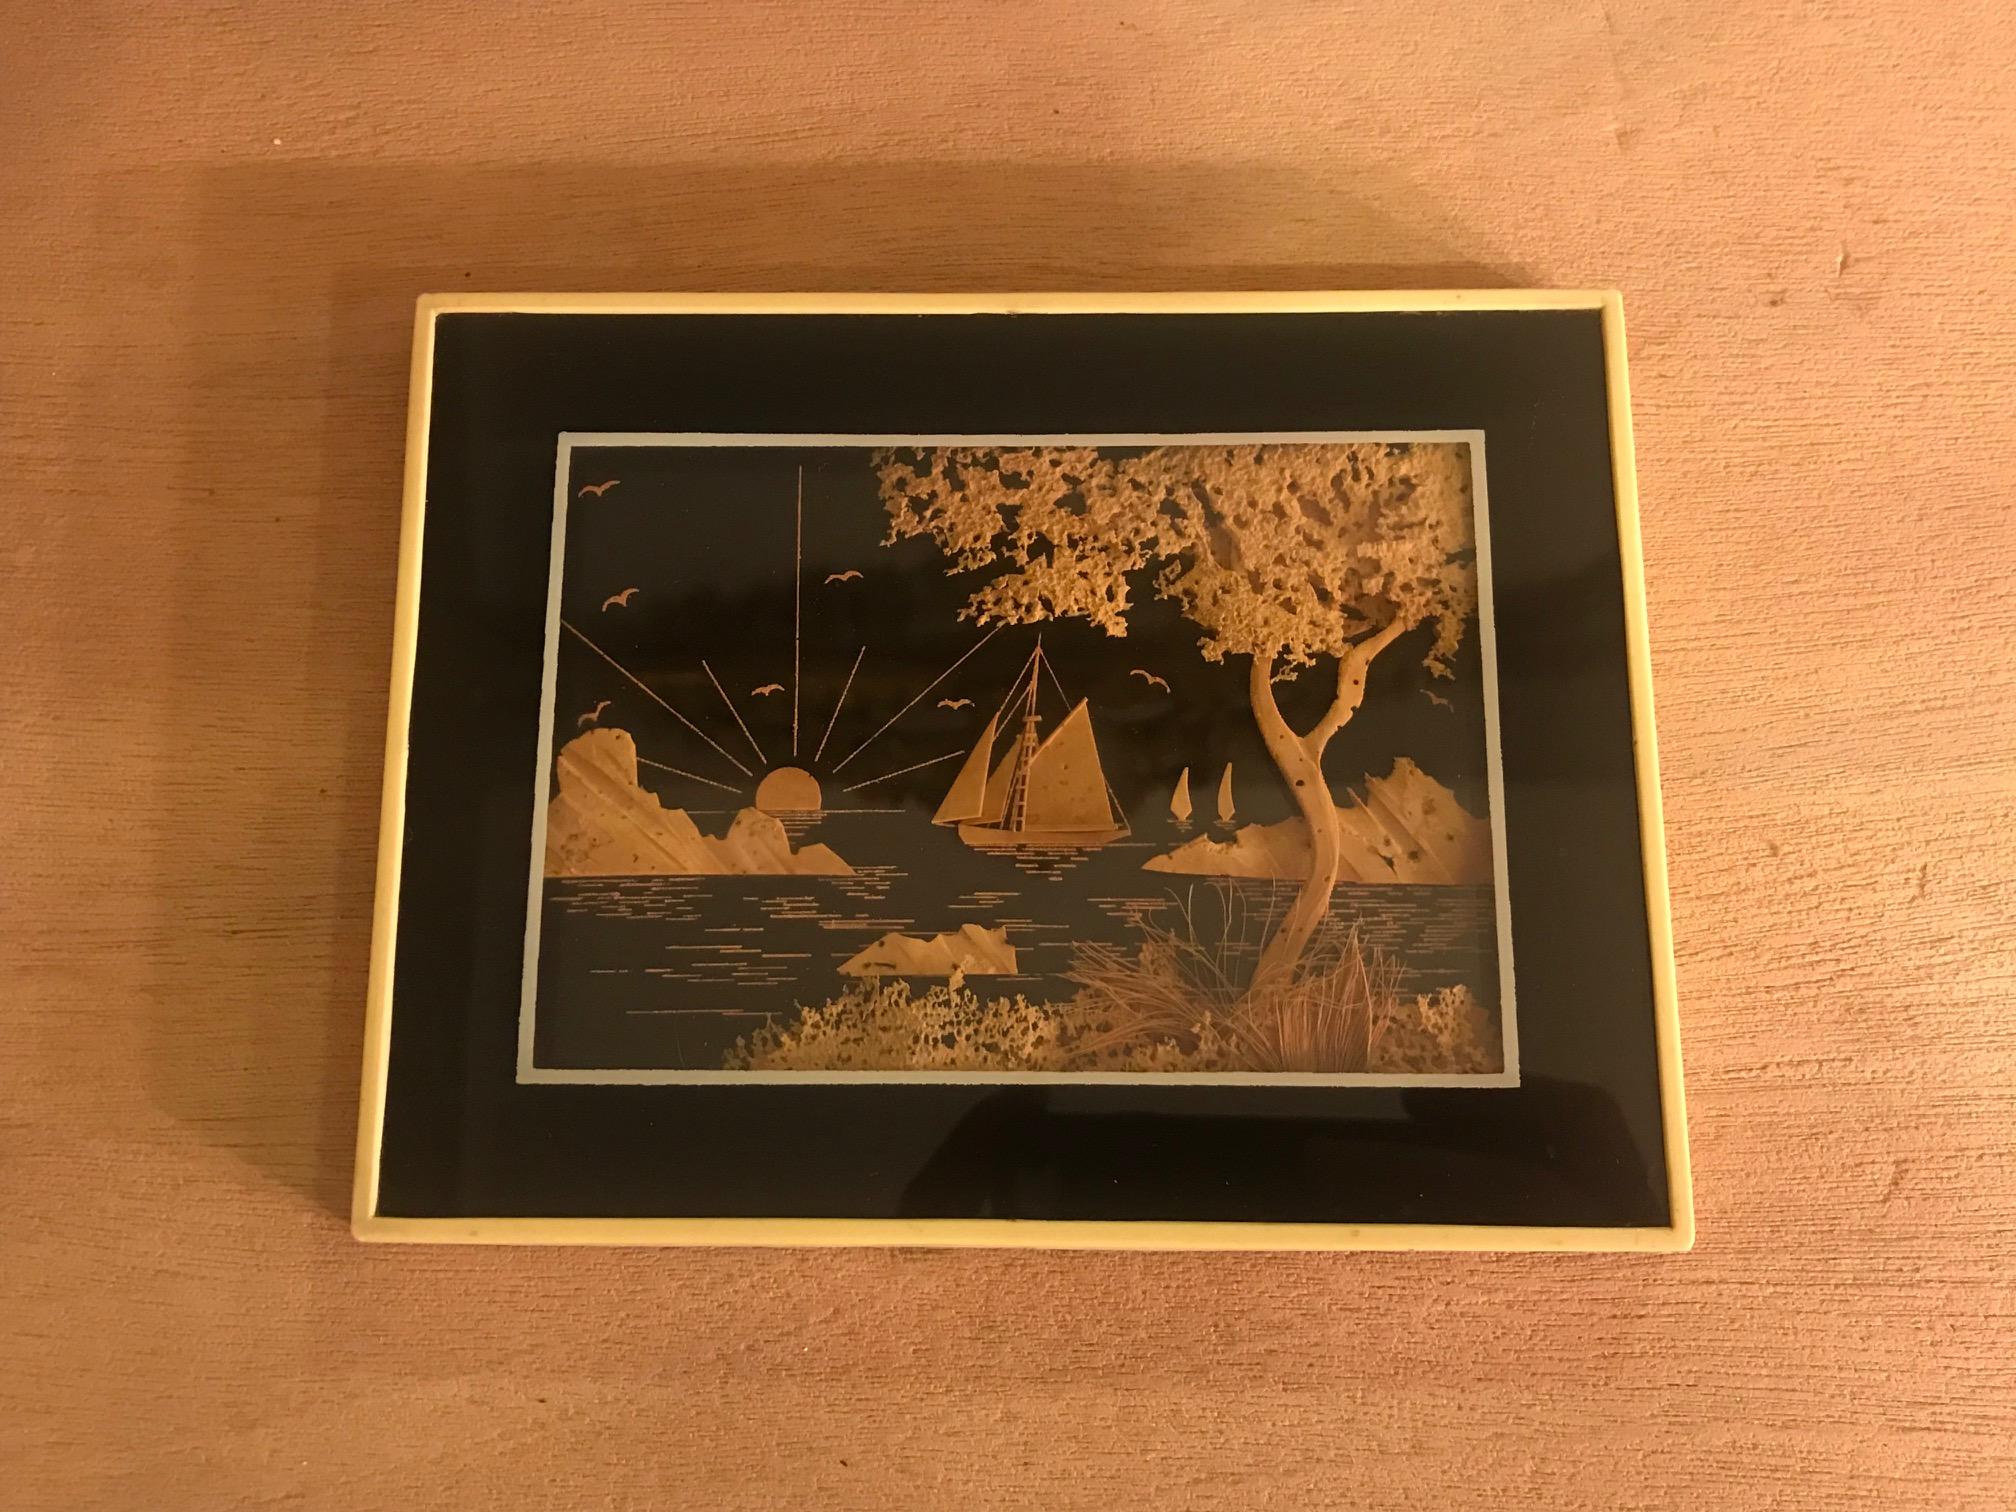 Original and rare 20th century Asian cork landscape made like a painting in a Frame from the 1950s. 
Delicate work of the cork.